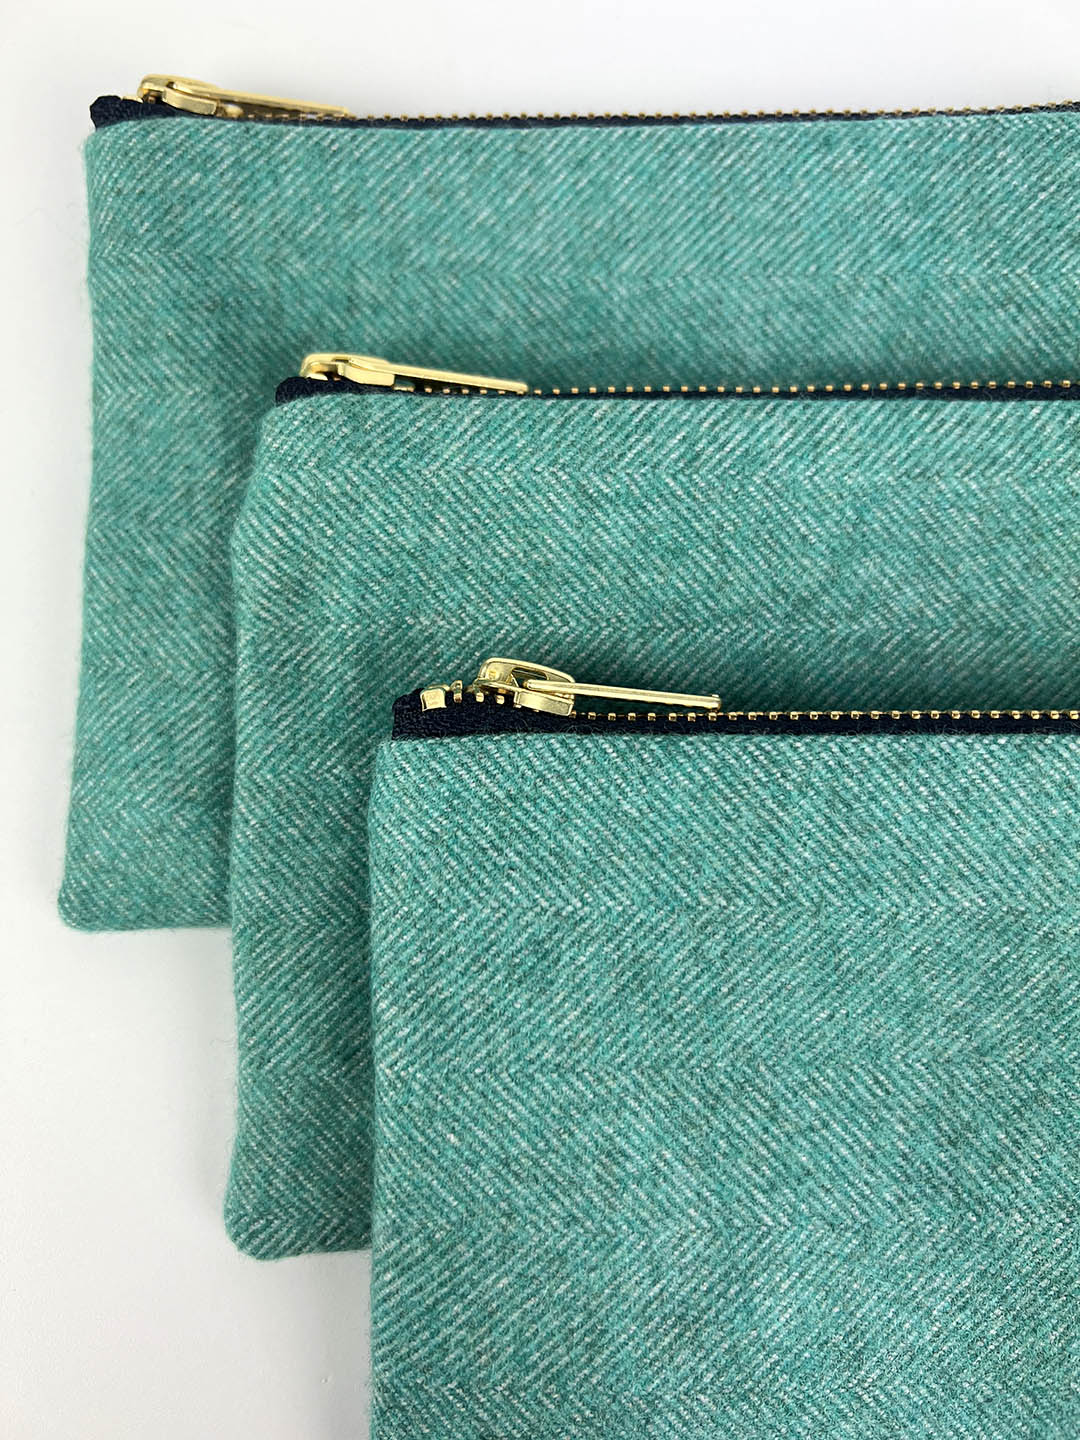 Scottish Tweed Jade coin purses handmade exclusively for the Scottish Textiles Showcase